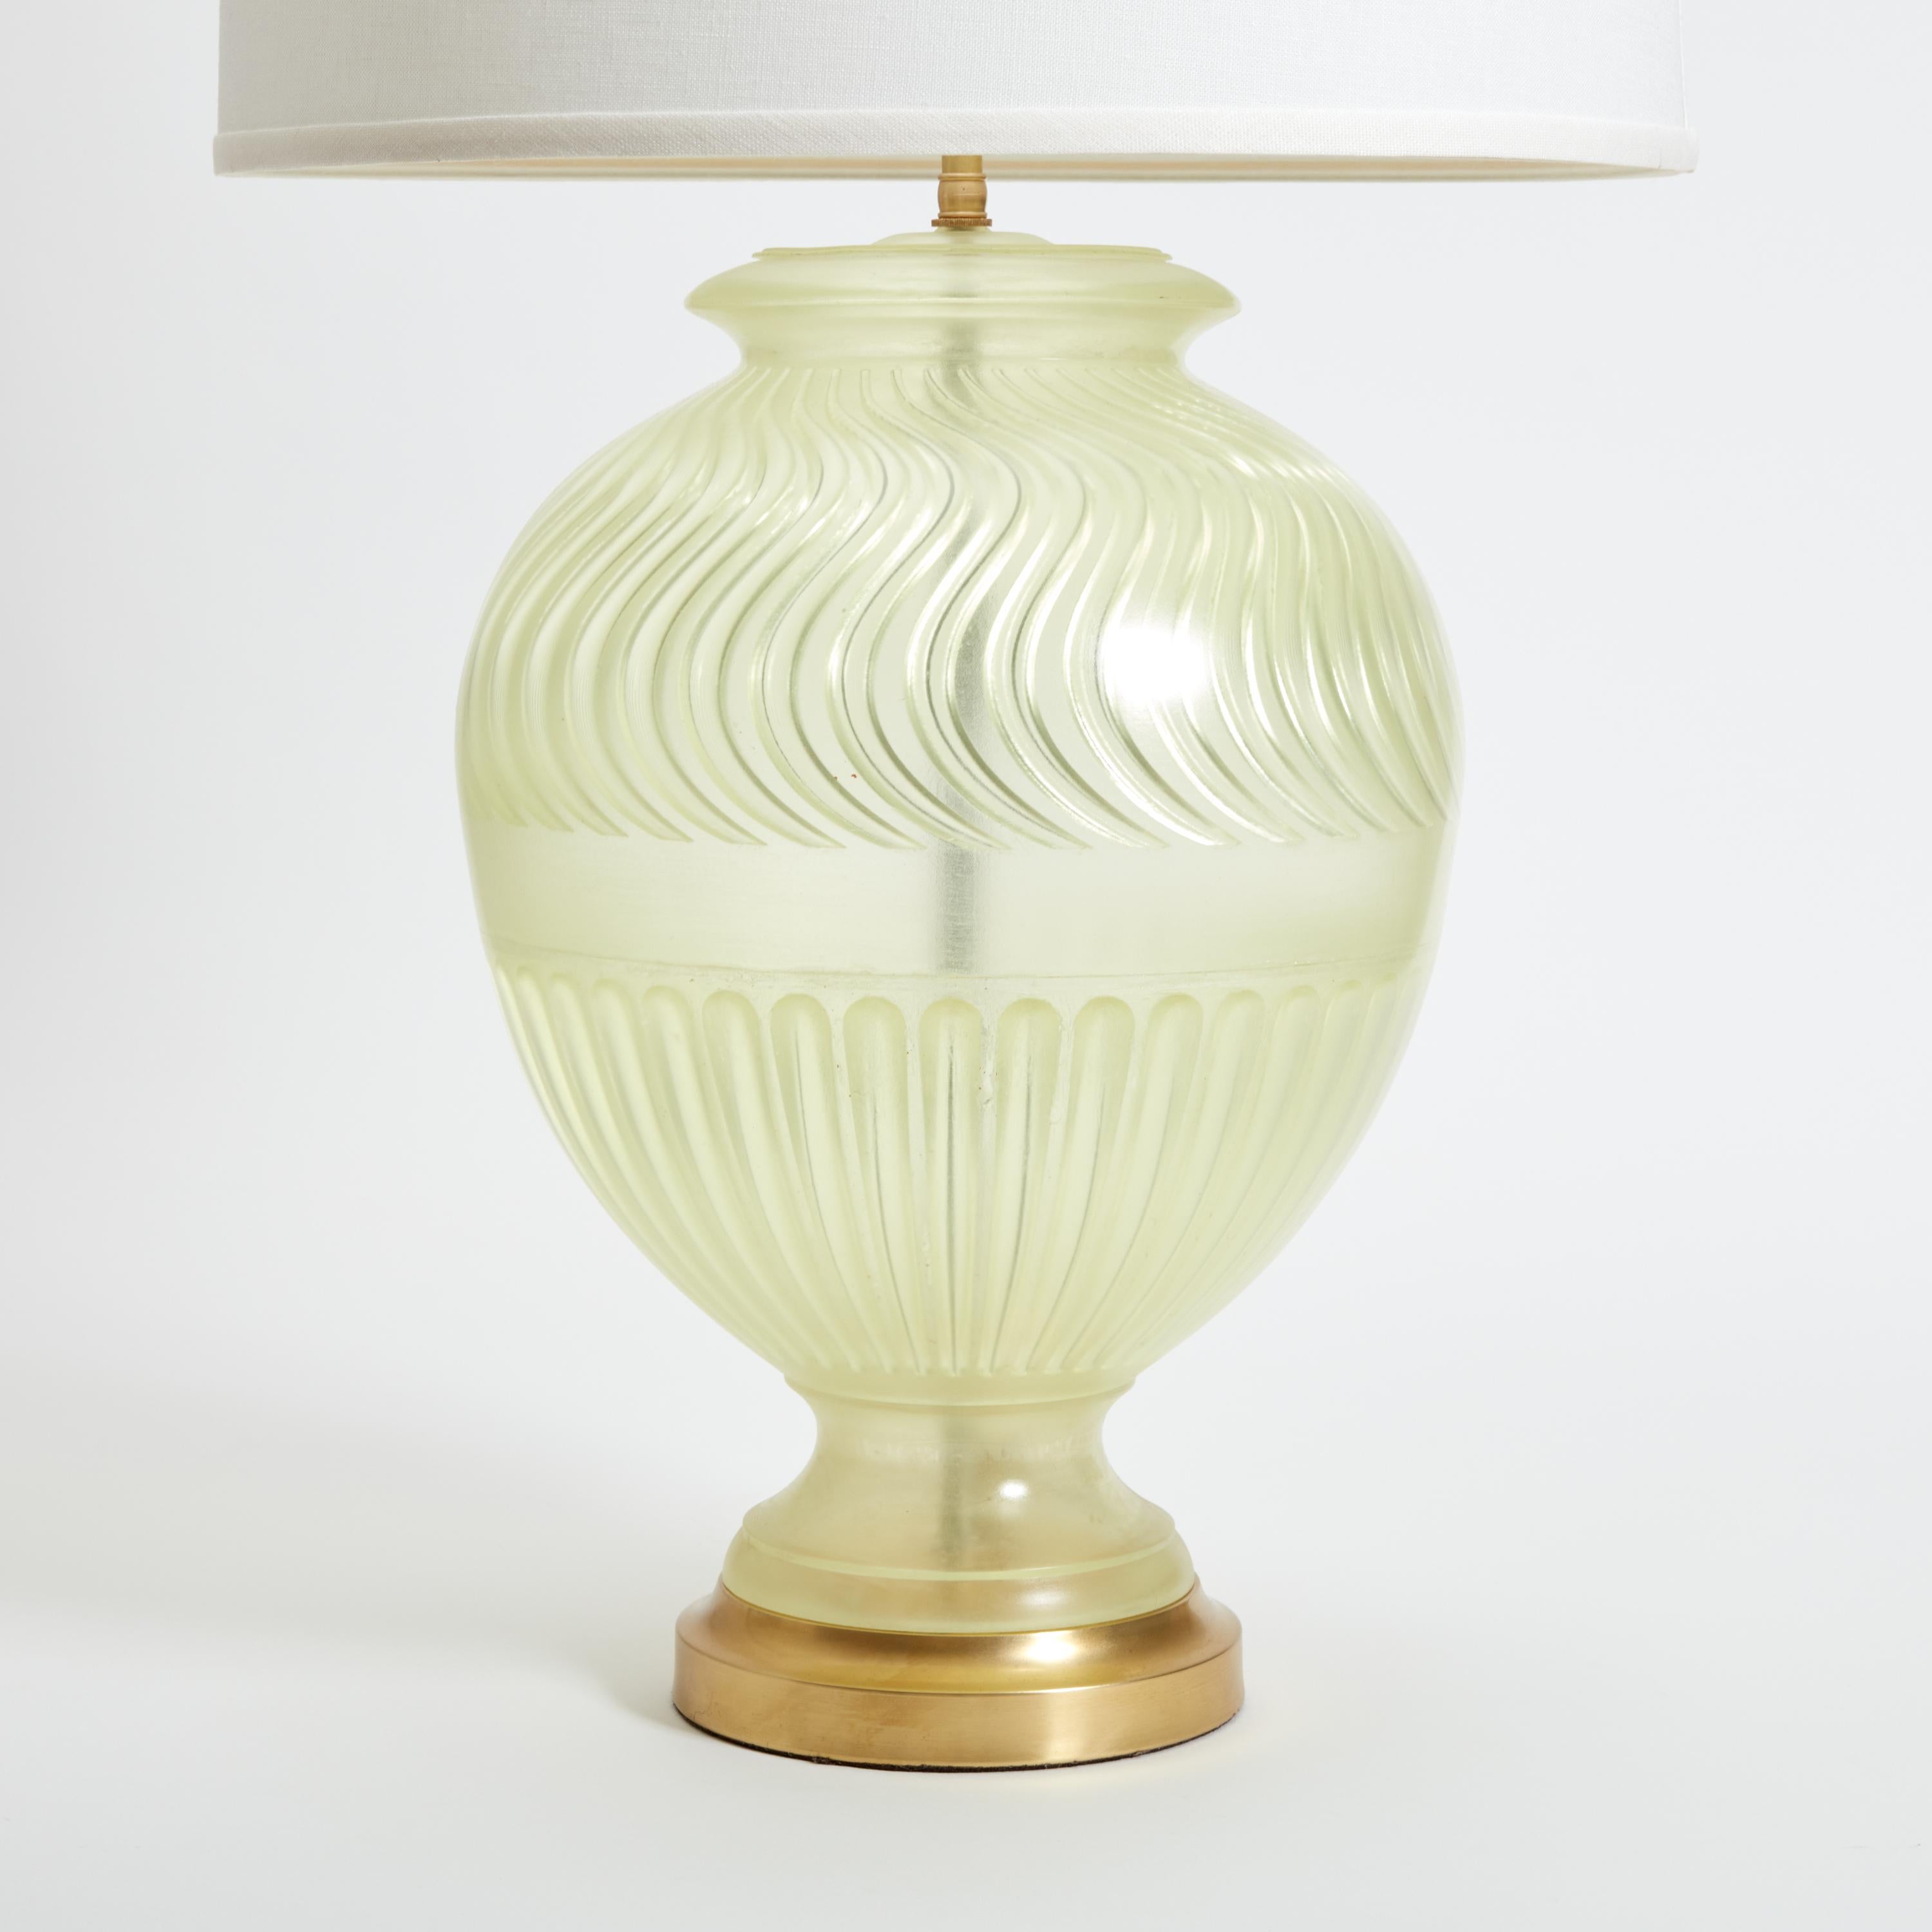 A pair of cast transparent resin lamps that are smooth on the outside with grooved design on the interior, based on an Assyrian vase design. Each lamp has brass details and two sockets. Shades are not included.